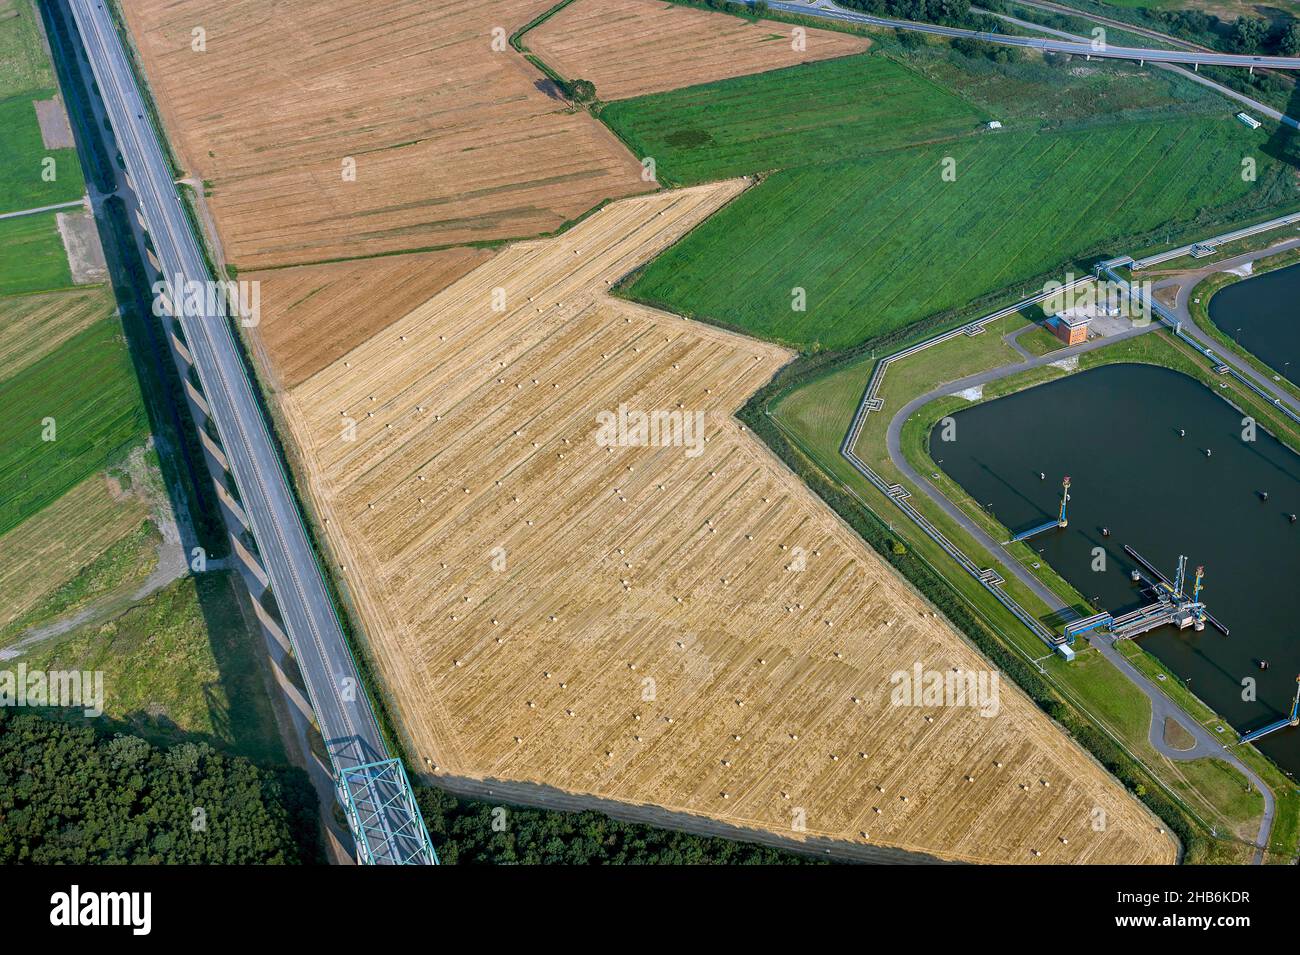 federal road B 5 to the high bridge Brunsbuettel over the Kiel Canal in field landscape, aerial view, Germany, Schleswig-Holstein, Brunsbuettel Stock Photo